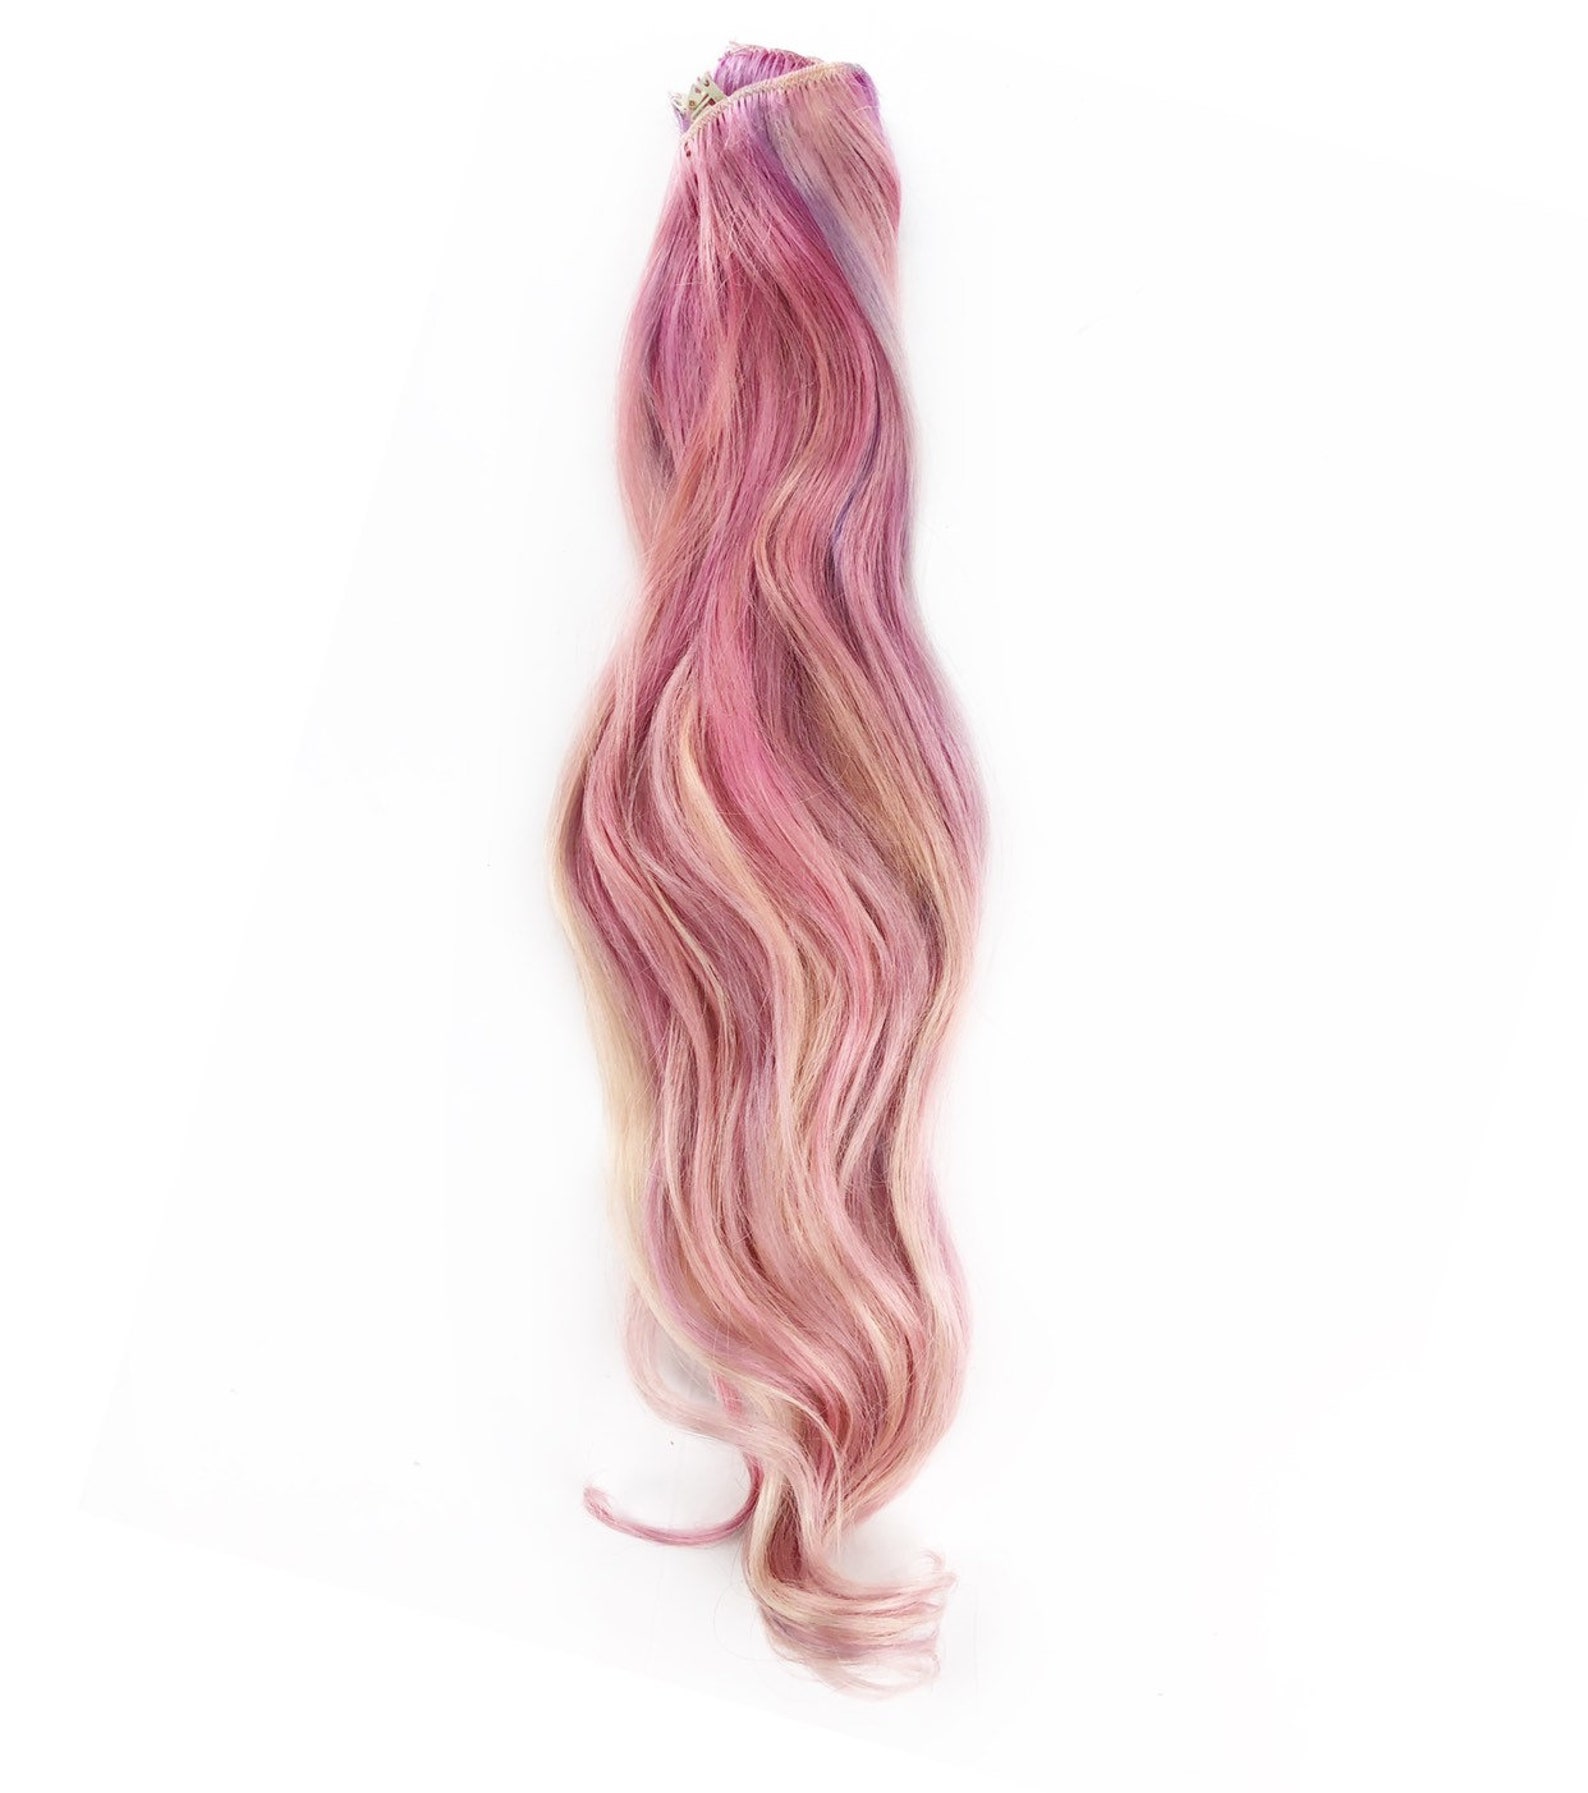 Pastel pink Rose gold hair extensions muted mauve hair | Etsy